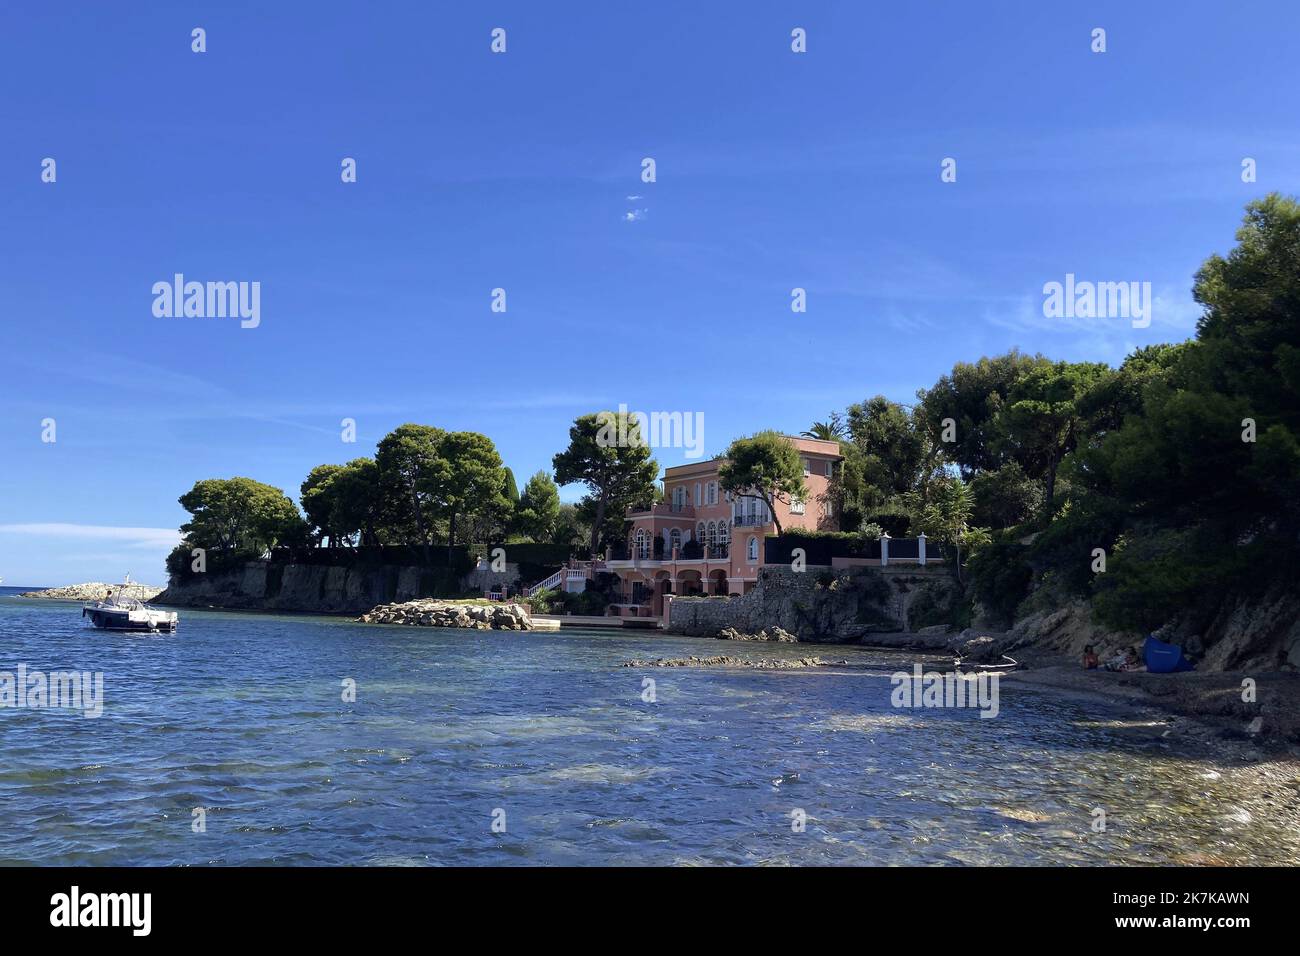 ©Francois Glories/MAXPPP - 09/09/2022 Villa 'La Fleur du Cap', known as Villa Socoglio, on the waterfront in Saint Cap Ferrat French Riviera, built in 1880 by the son of an arms dealer. It later hosted the Duchess of Marlborough, King Leopold III, Charlie Chaplin and David Niven. The villa was used for the filming of 'The Pink Panther Trail' (1982). Current owners Ana Tzarev and Robert Chandler. Saint jean Cap Ferrat France. Stock Photo